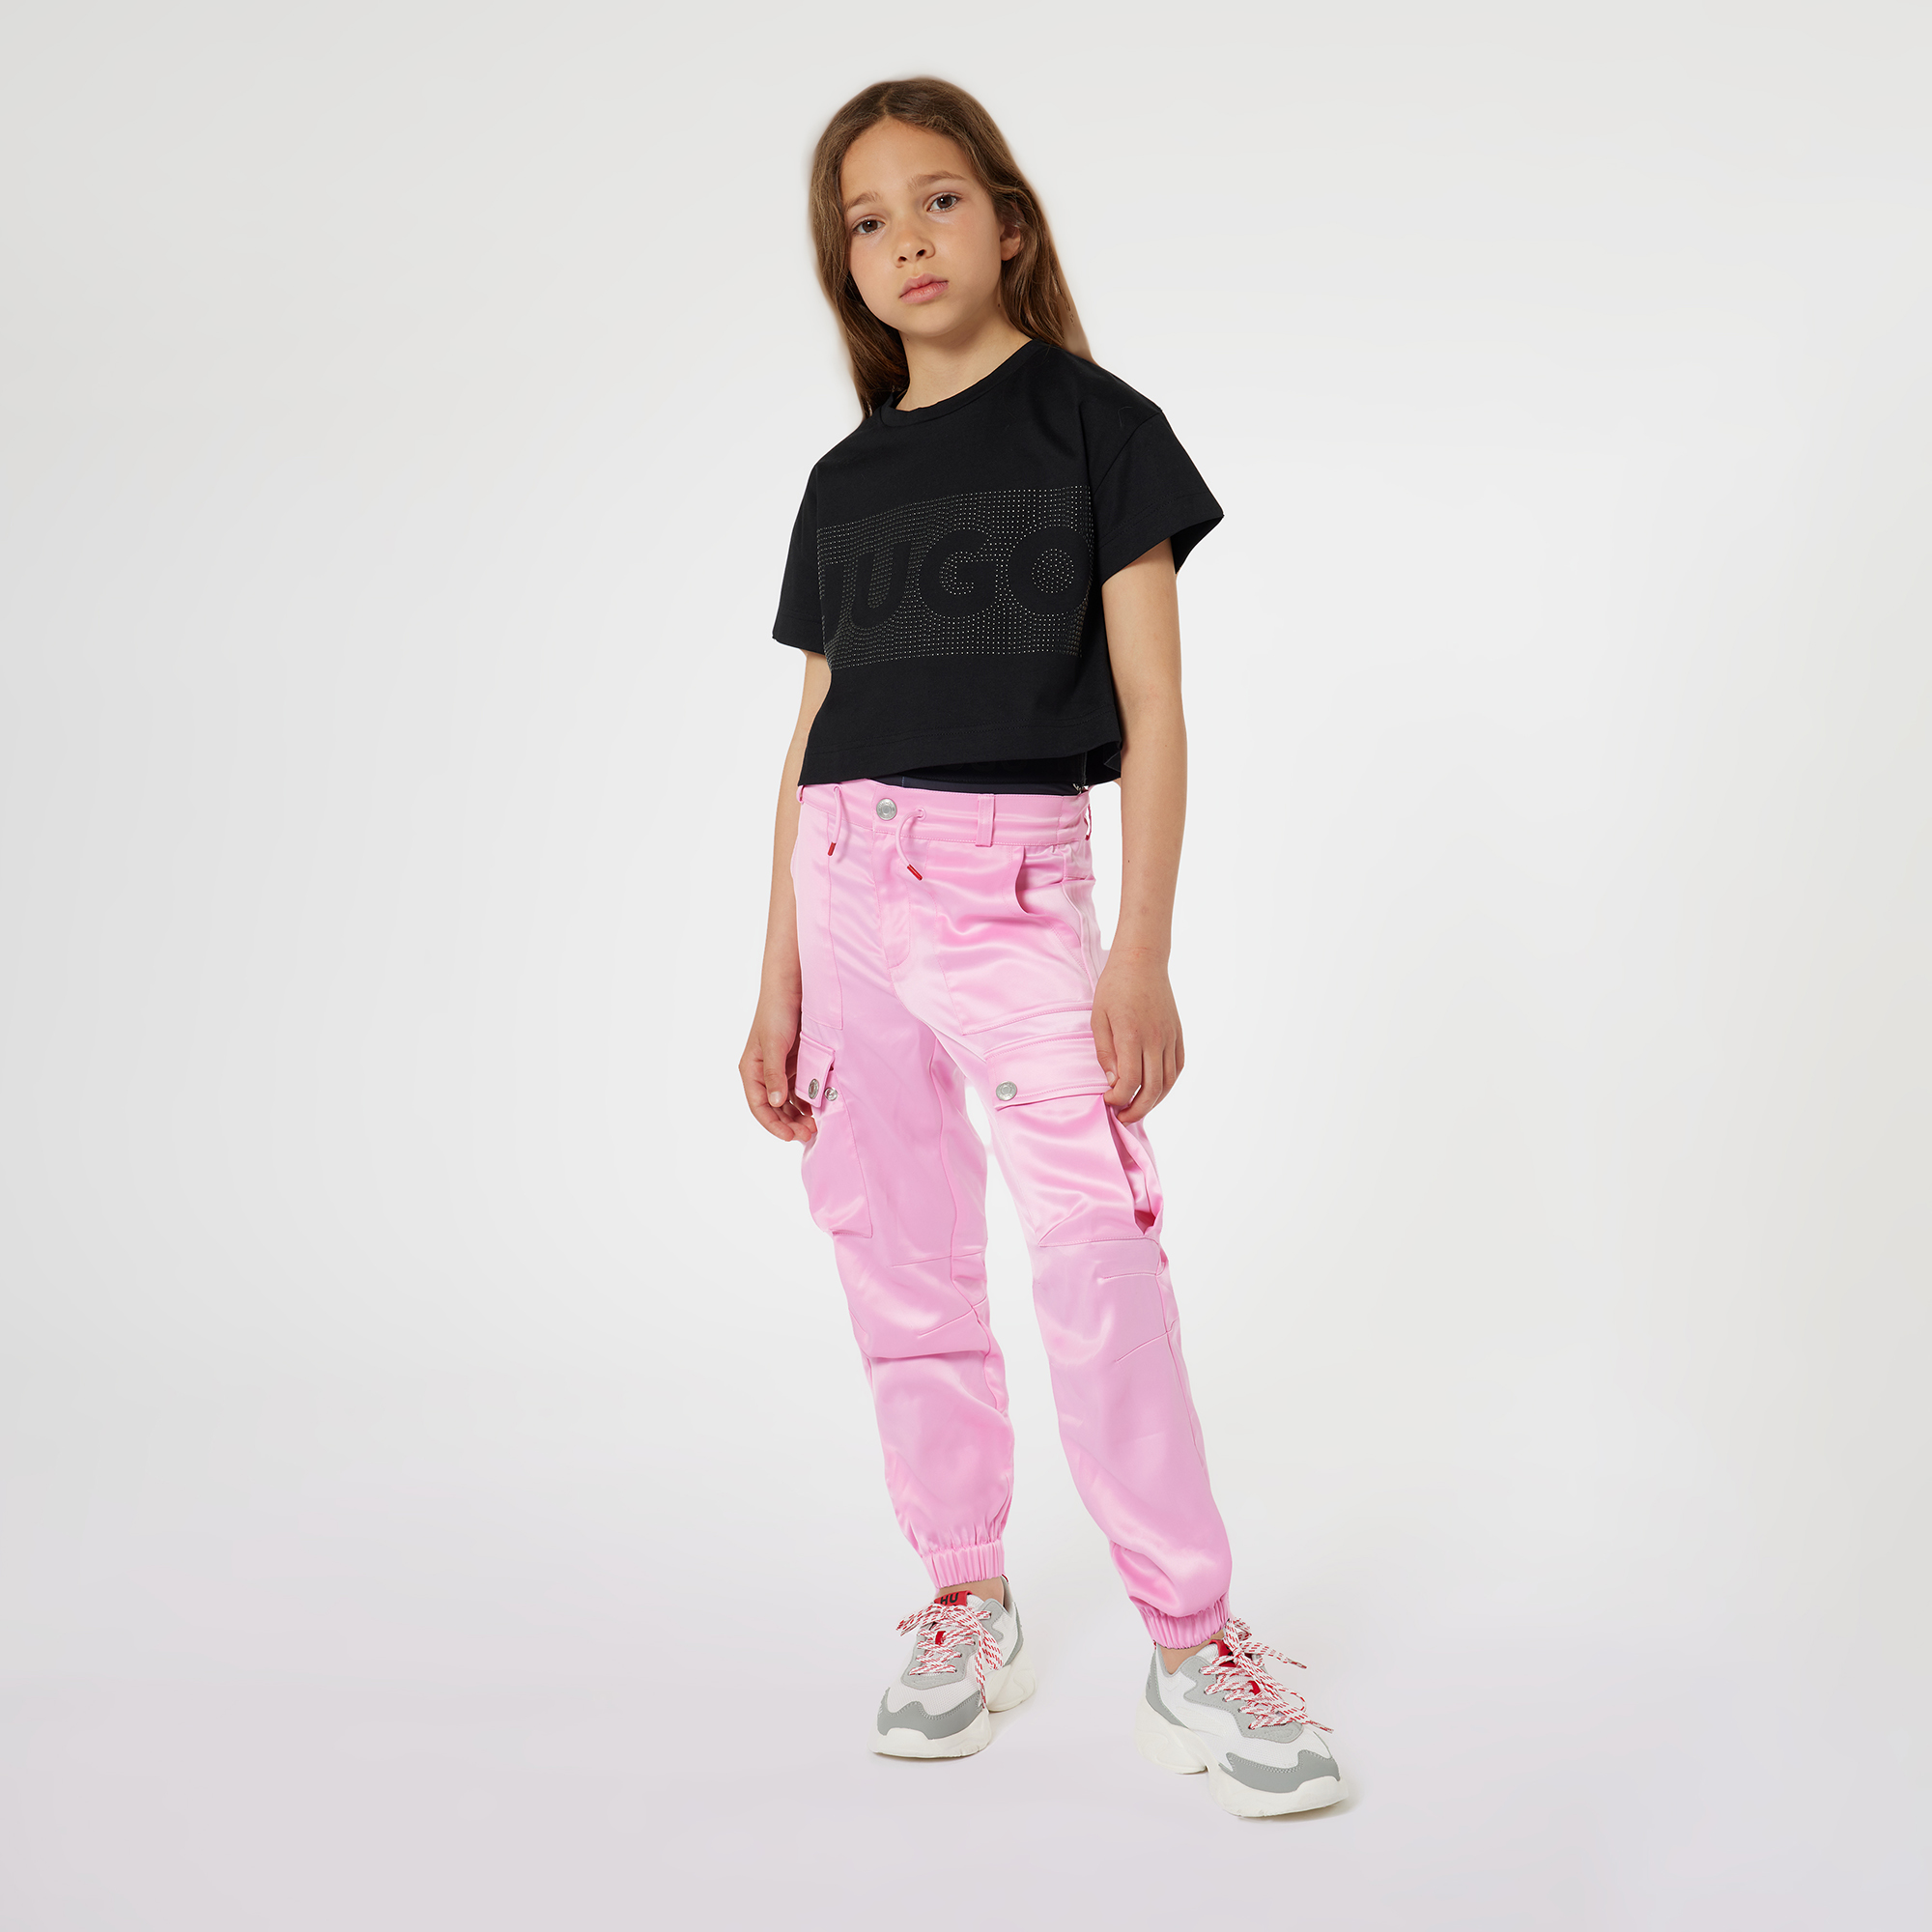 Wide-cut satin-look trousers HUGO for GIRL